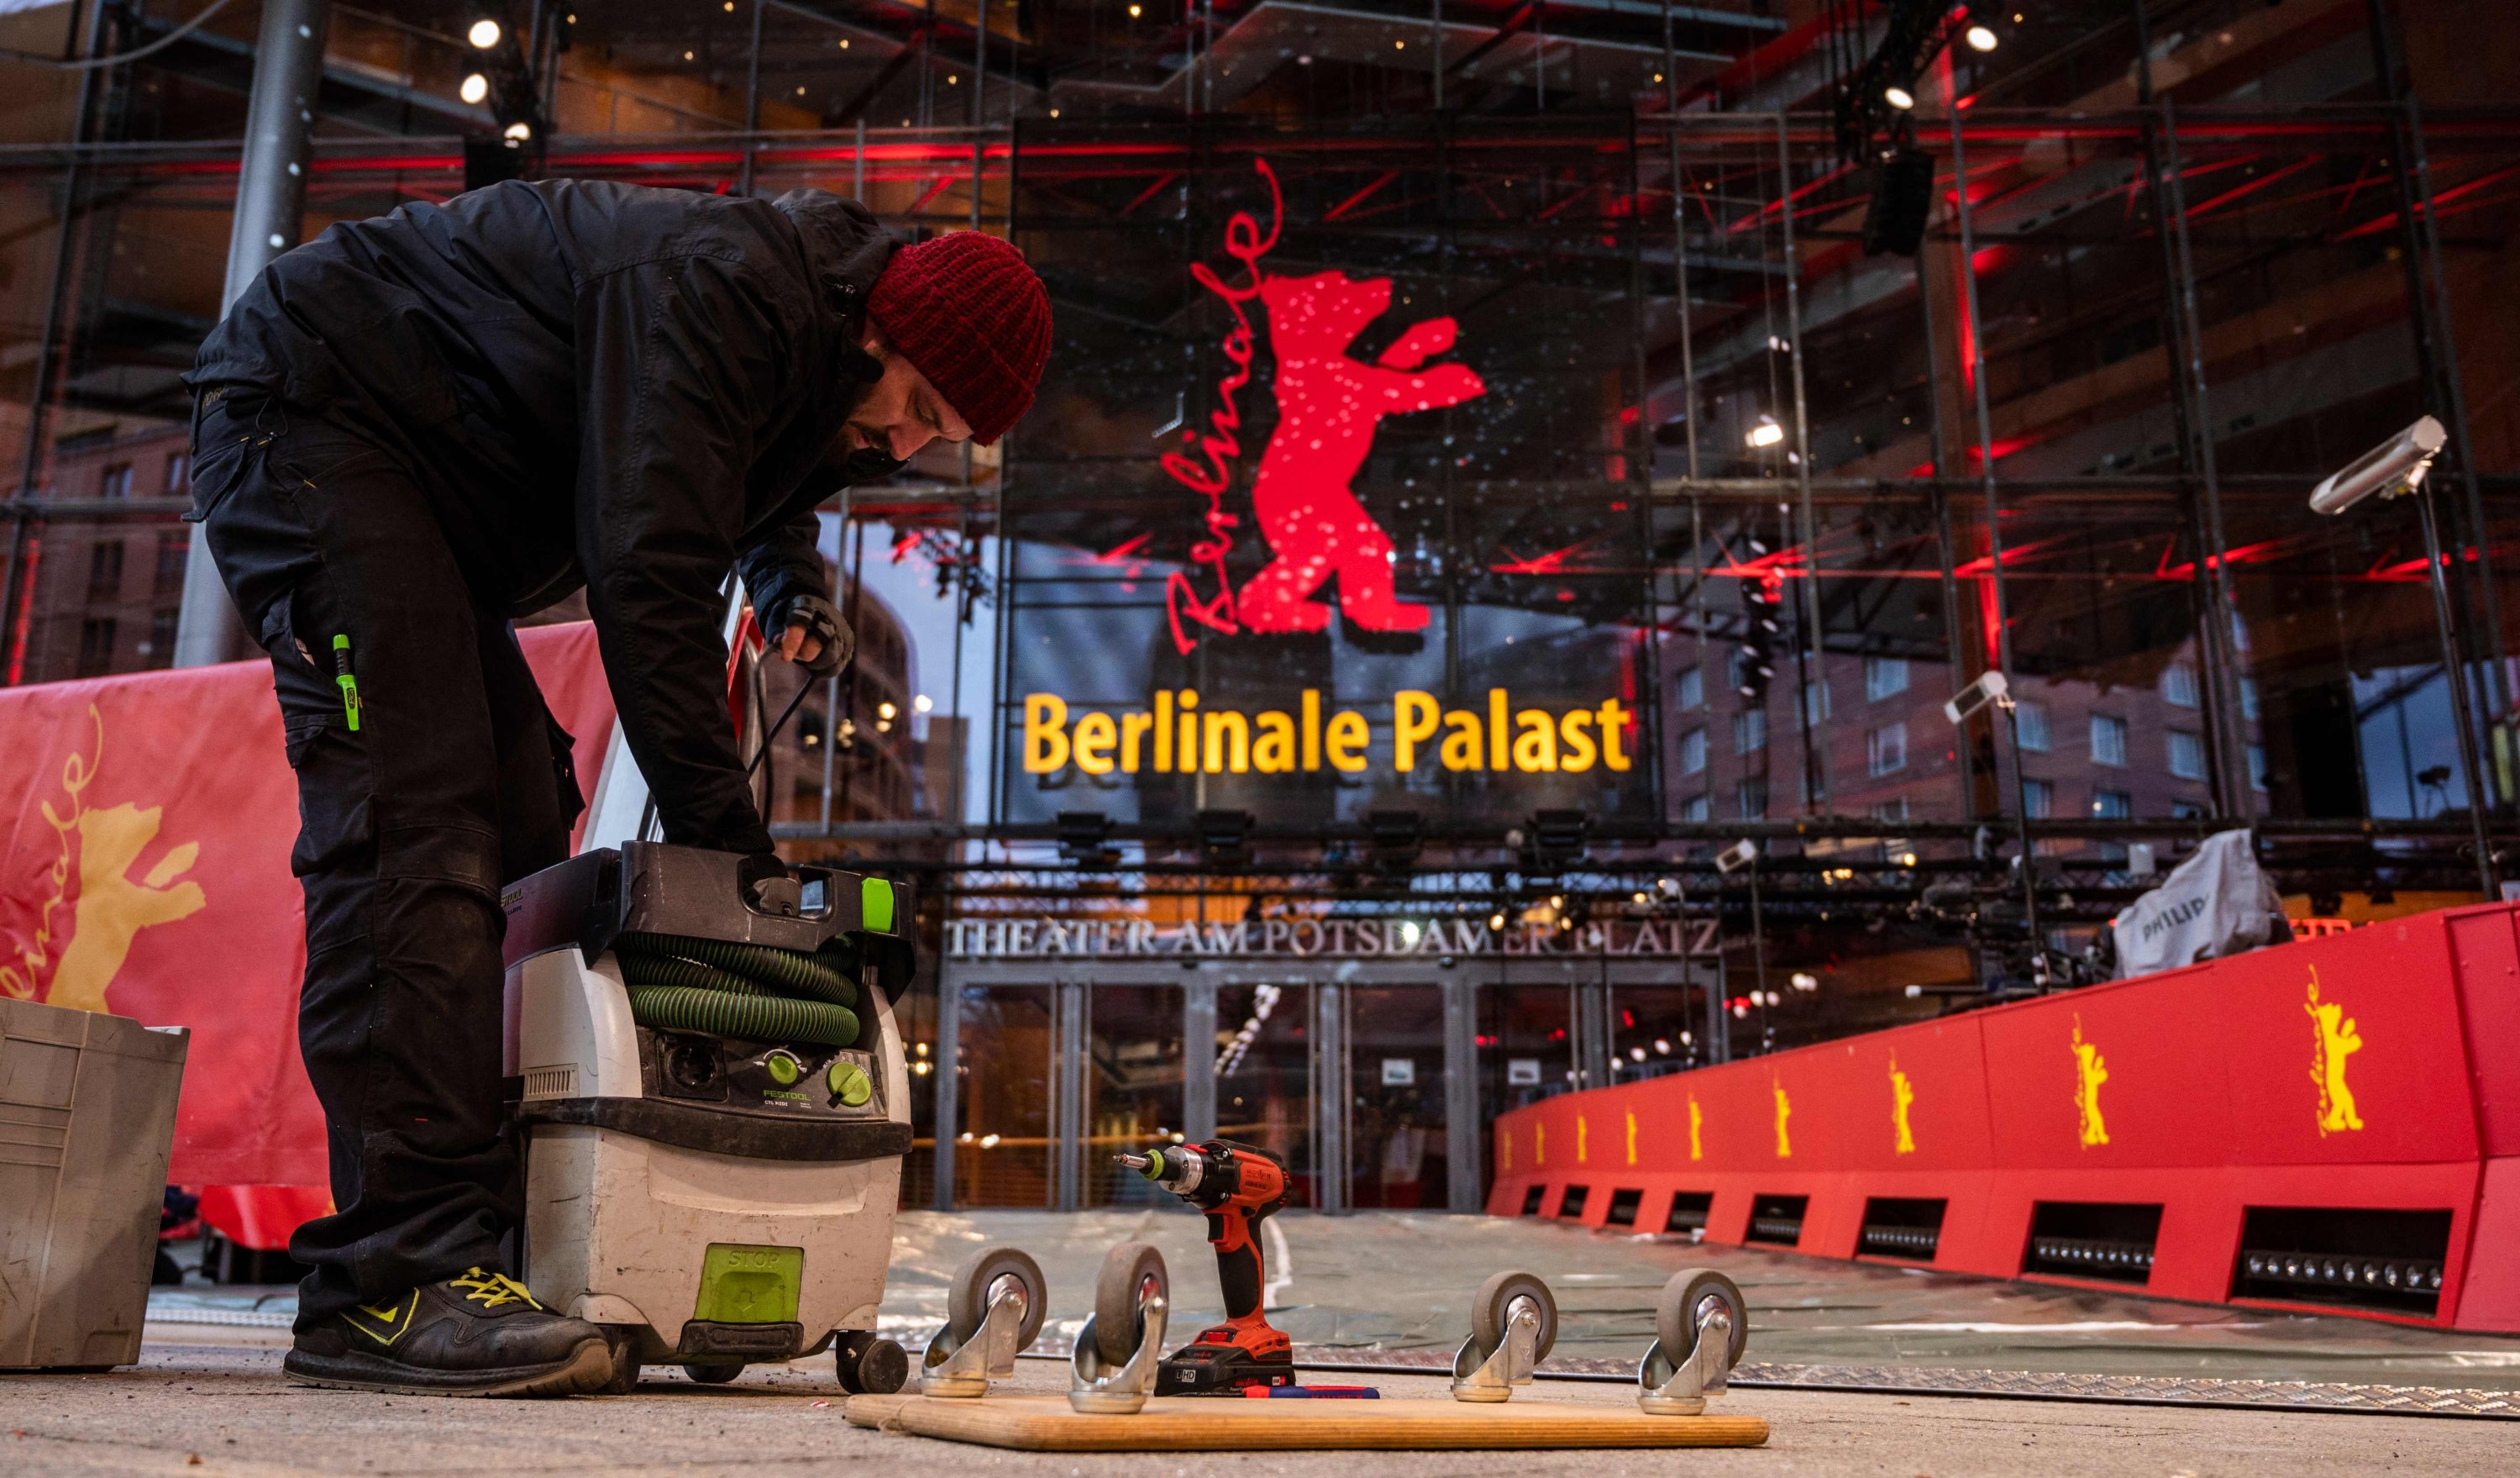 A worker busies himself in front of the Berlinale Palace in Berlin, Feb. 9, 2022, as last minute work is performed ahead of the opening of the 72nd Berlinale film festival. (AFP Photo)